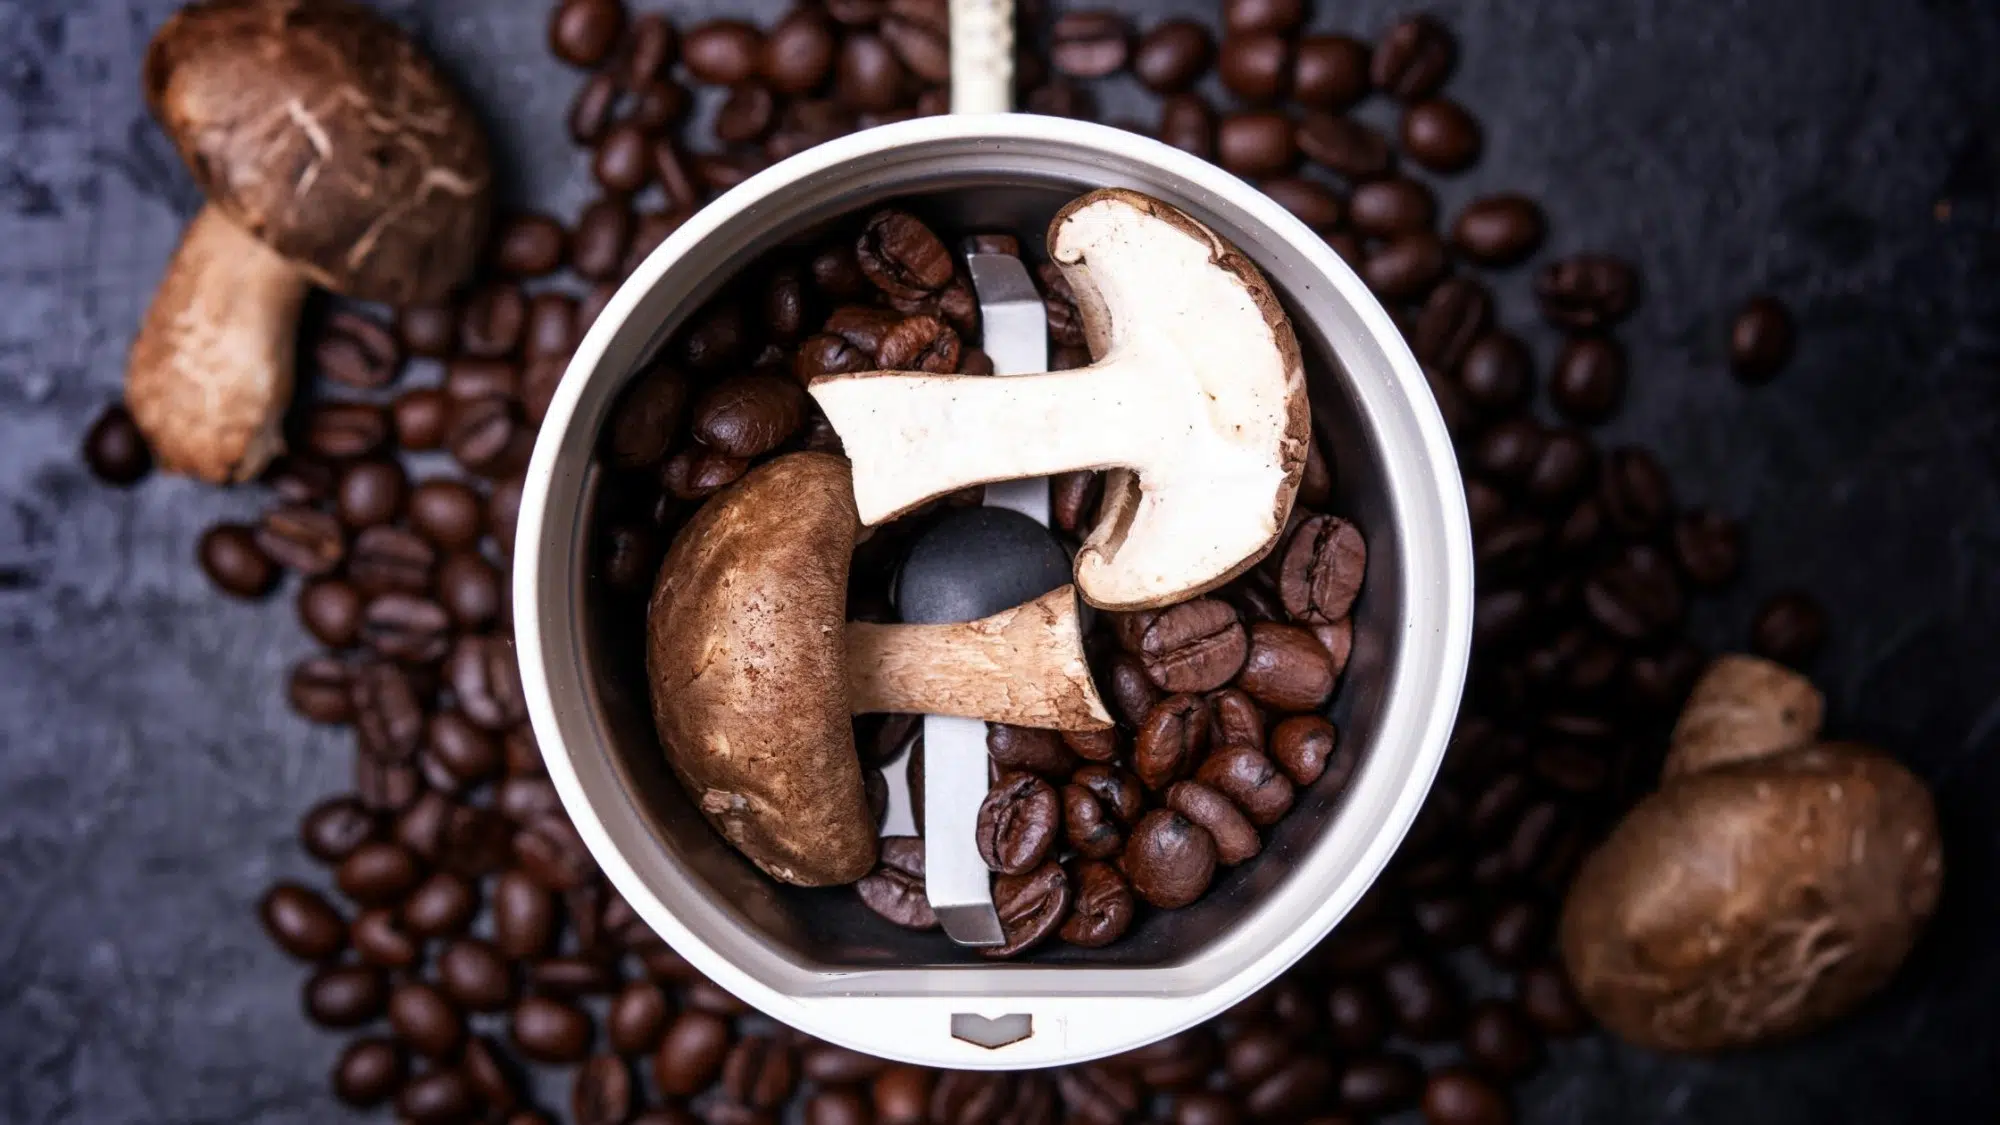 Mushroom Coffee: A Blend of Flavor and Functional Benefits